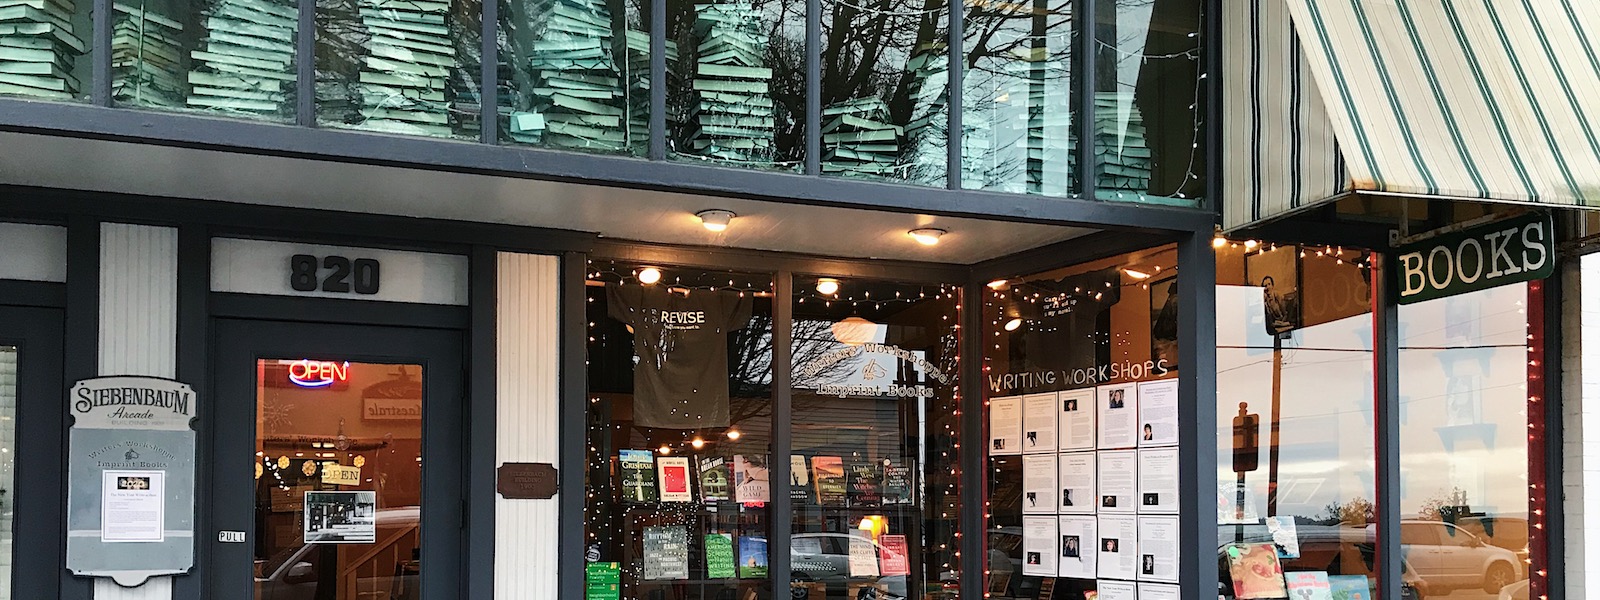 Imprint Bookstore and The Writers' Workshoppe